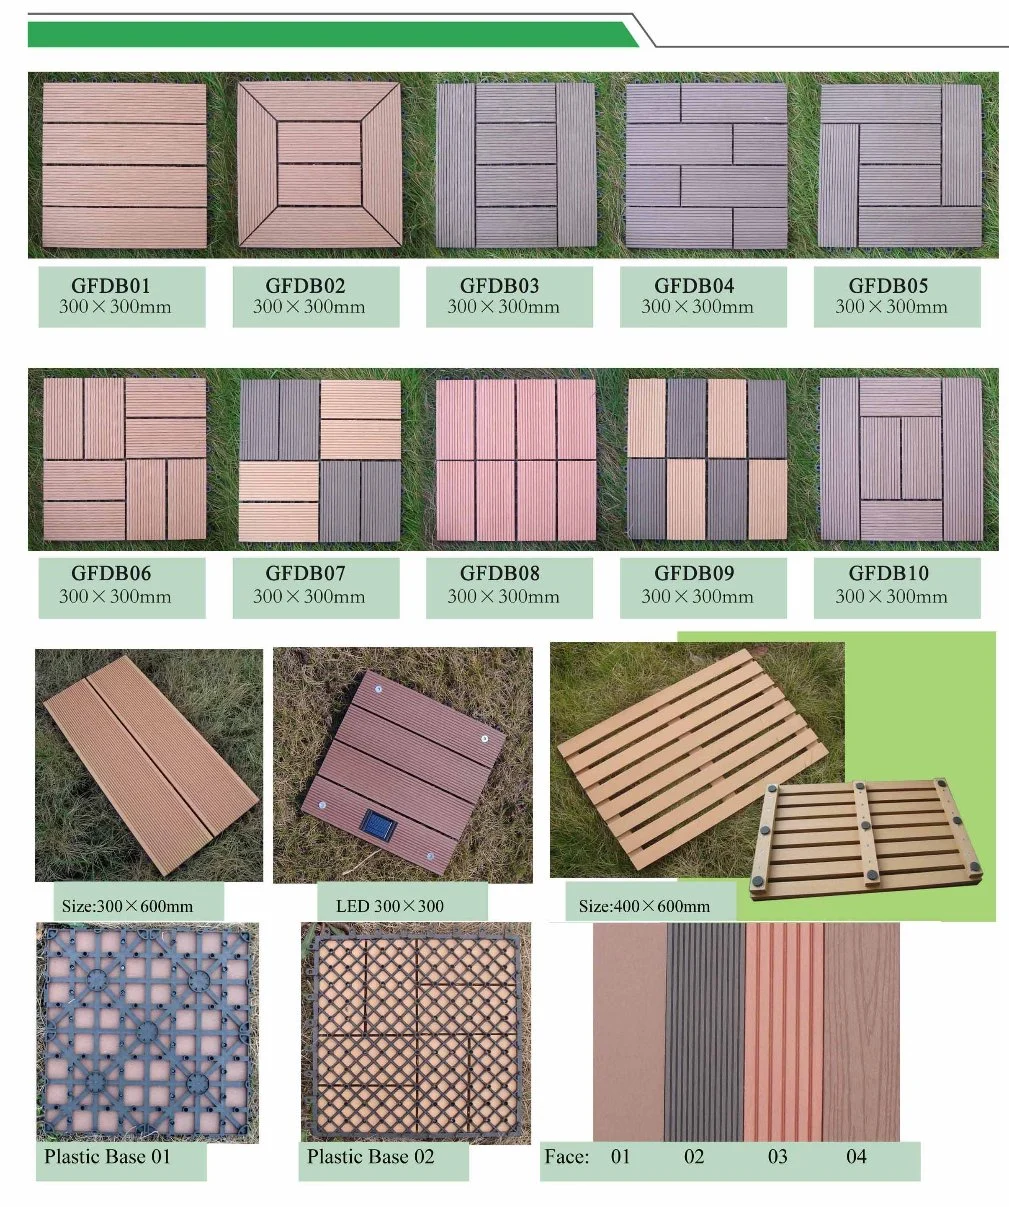 High Quality New Generation Co-Extrusion Composite Decking Flooring/WPC DIY Decking (300*300)